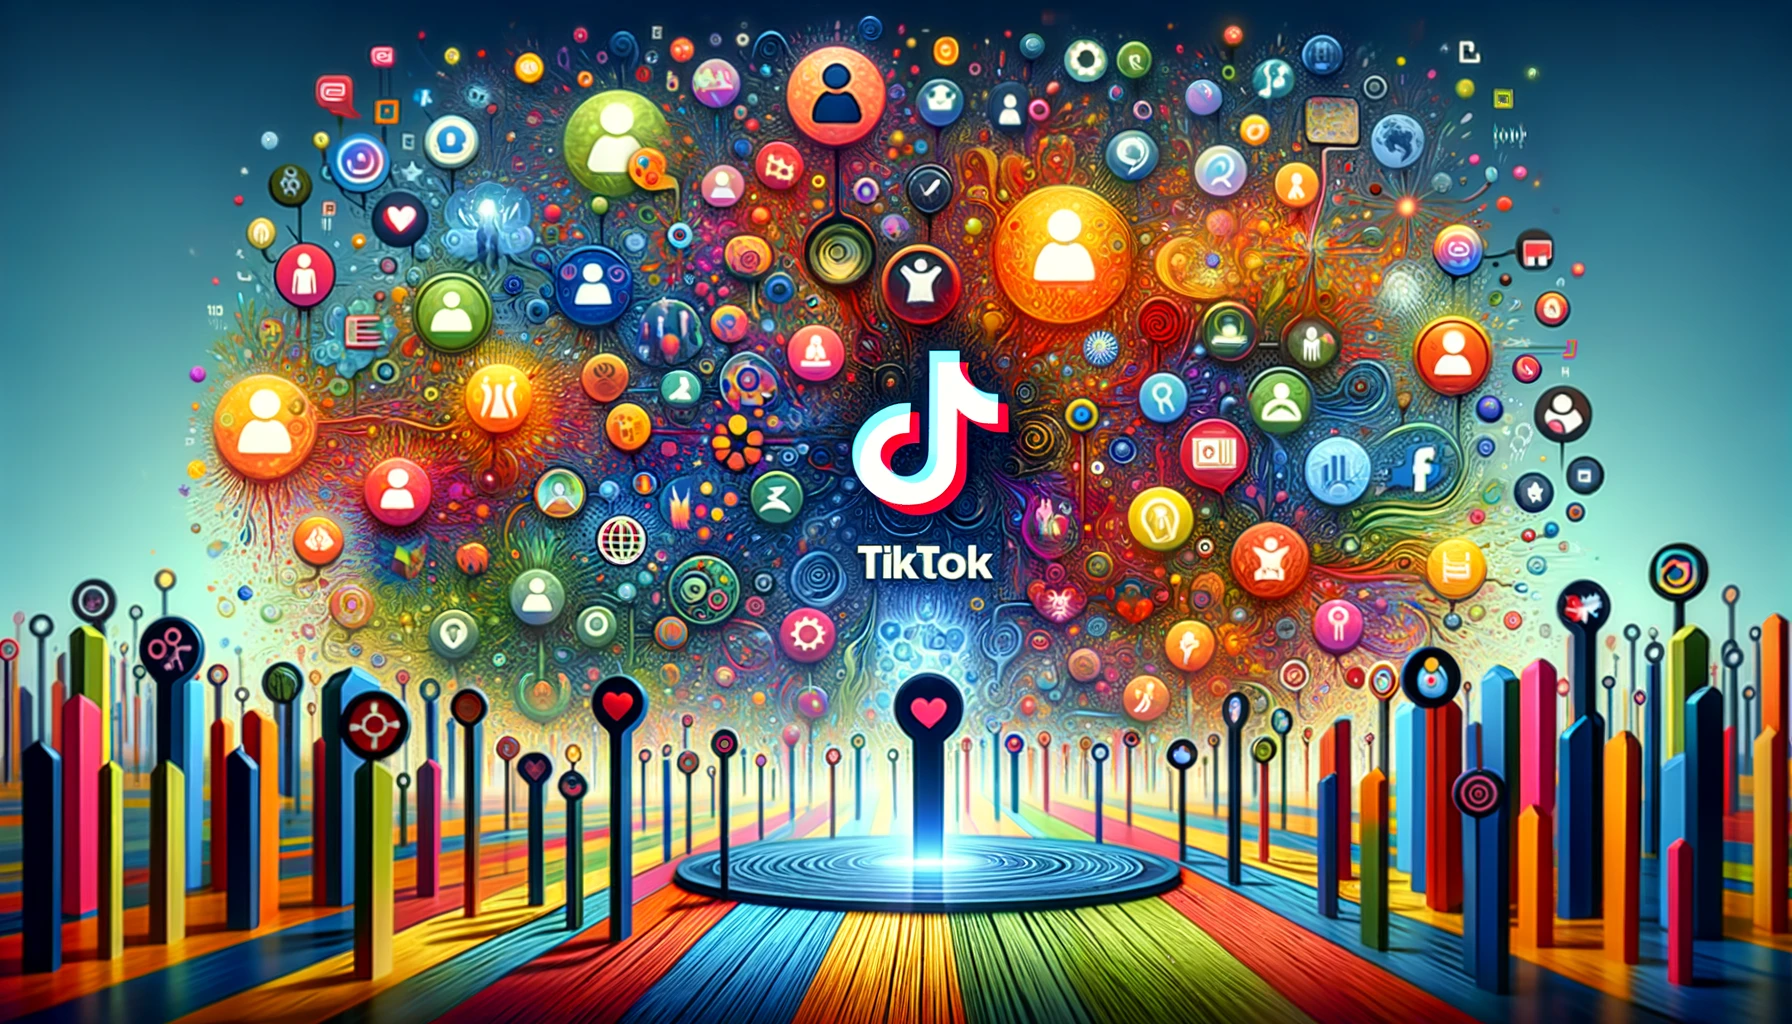 Abstract visualization representing TikTok Ad Targeting with colorful networks and demographic icons, embodying engagement and diversity.